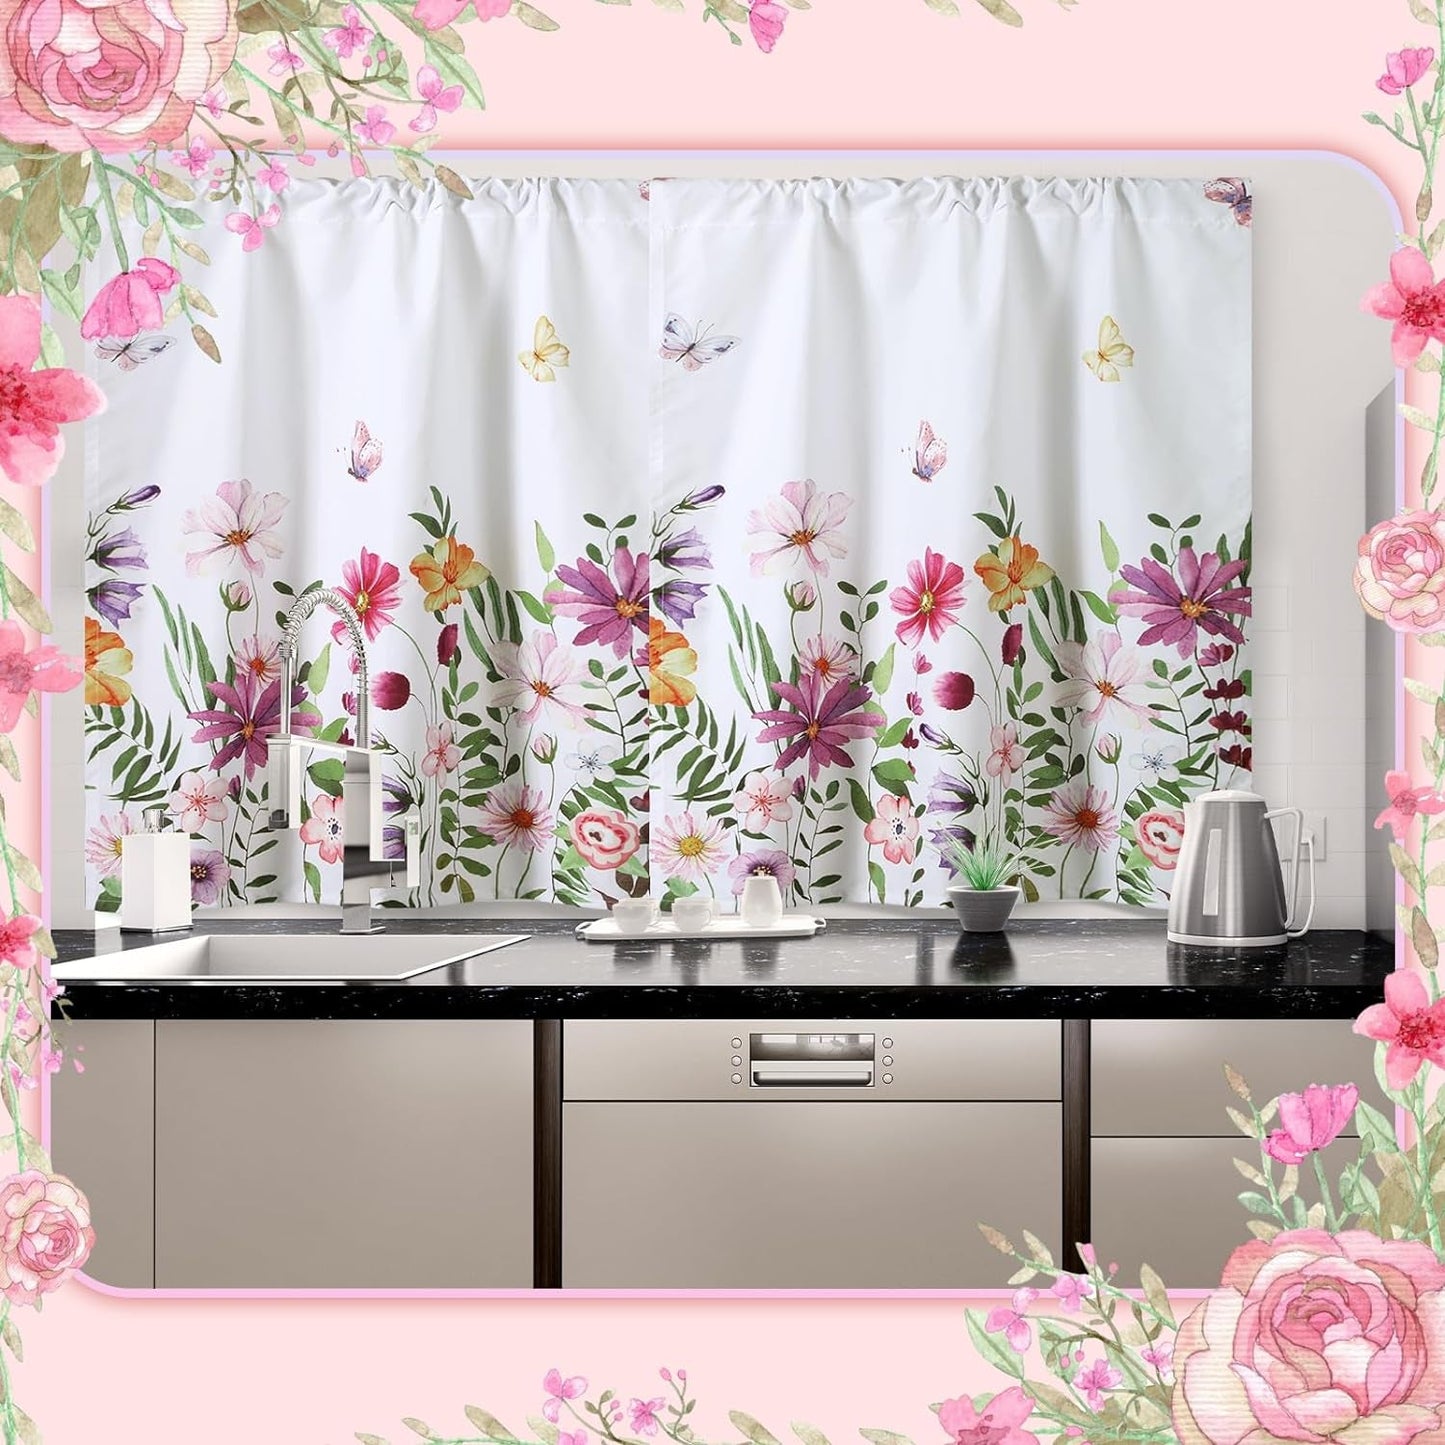 3 Piece Floral Kitchen Curtain Sets with Valance Spring Kitchen Curtains Polyester Kitchen Cafe Curtains Summer Farmhouse Kitchen Door Curtains Spring Home Decor for Kitchen